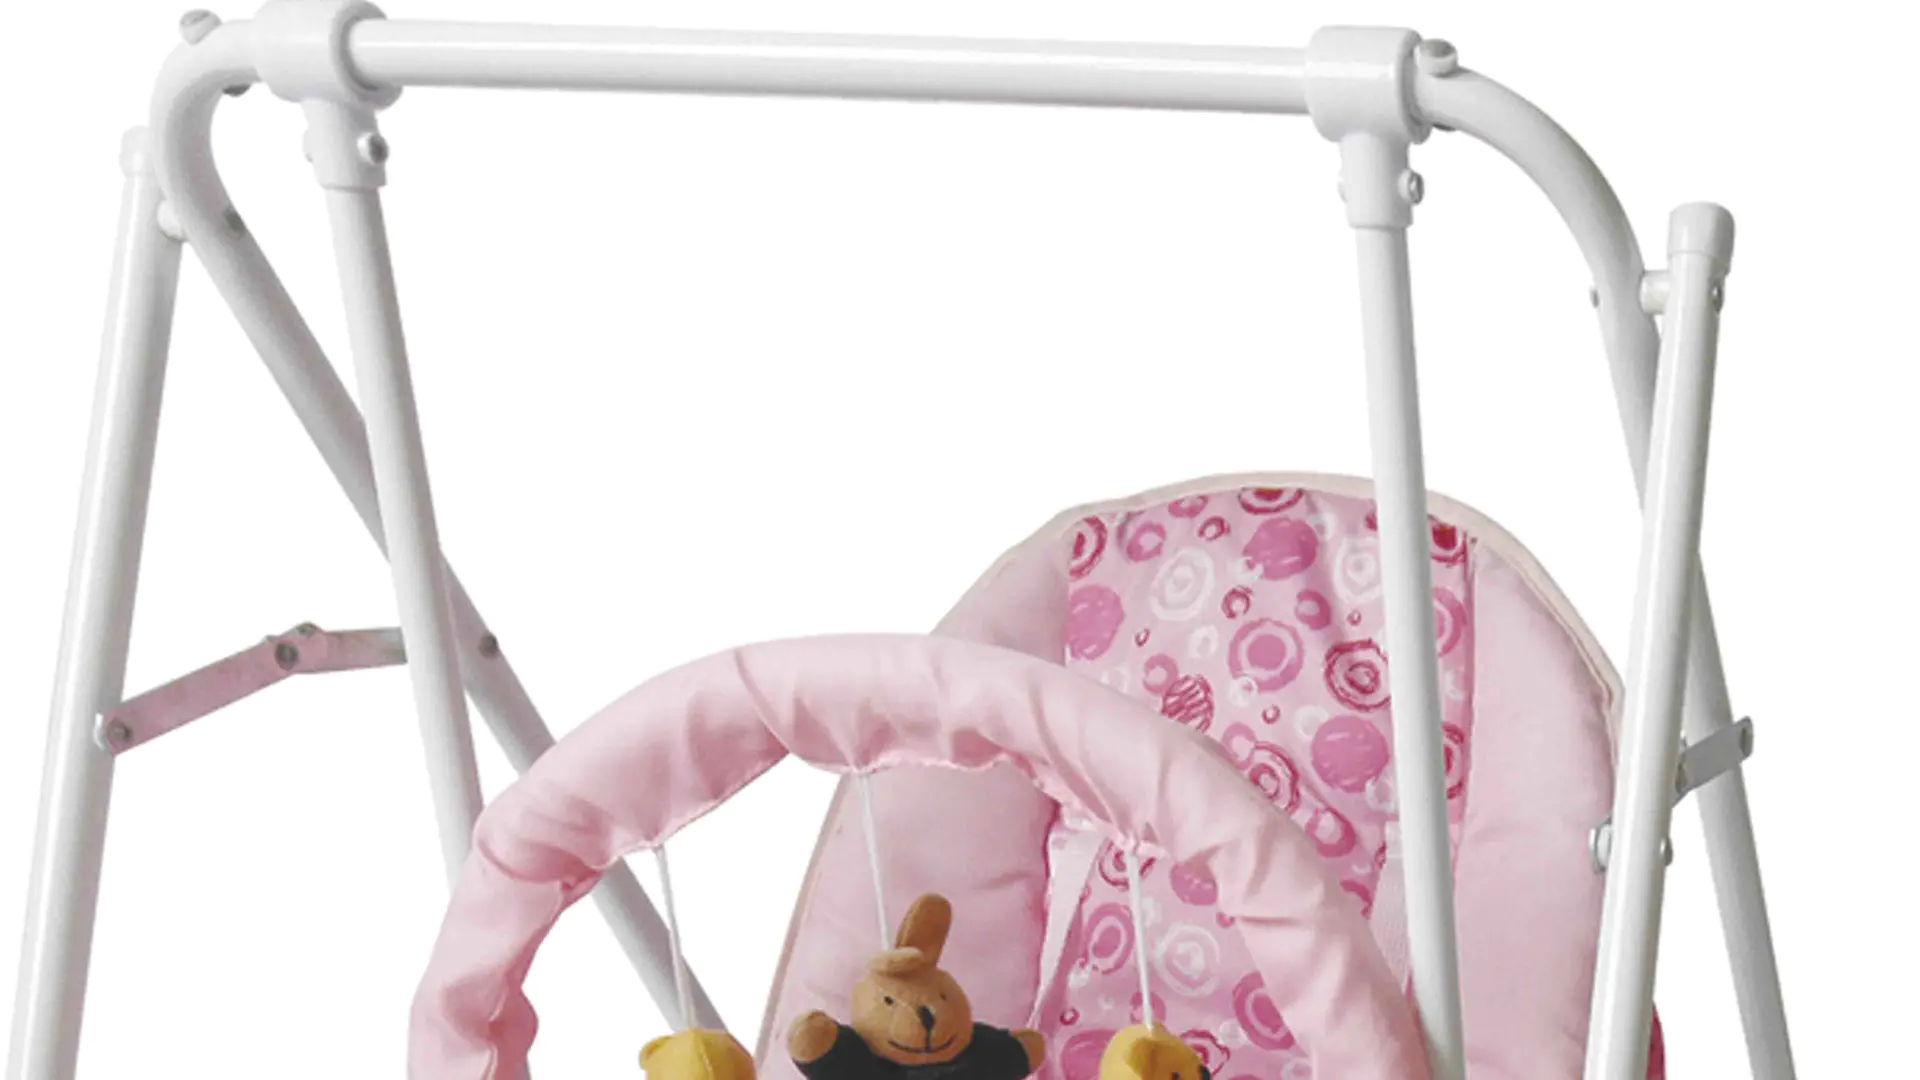 Aoqi baby musical swing chair inquire now for babys room